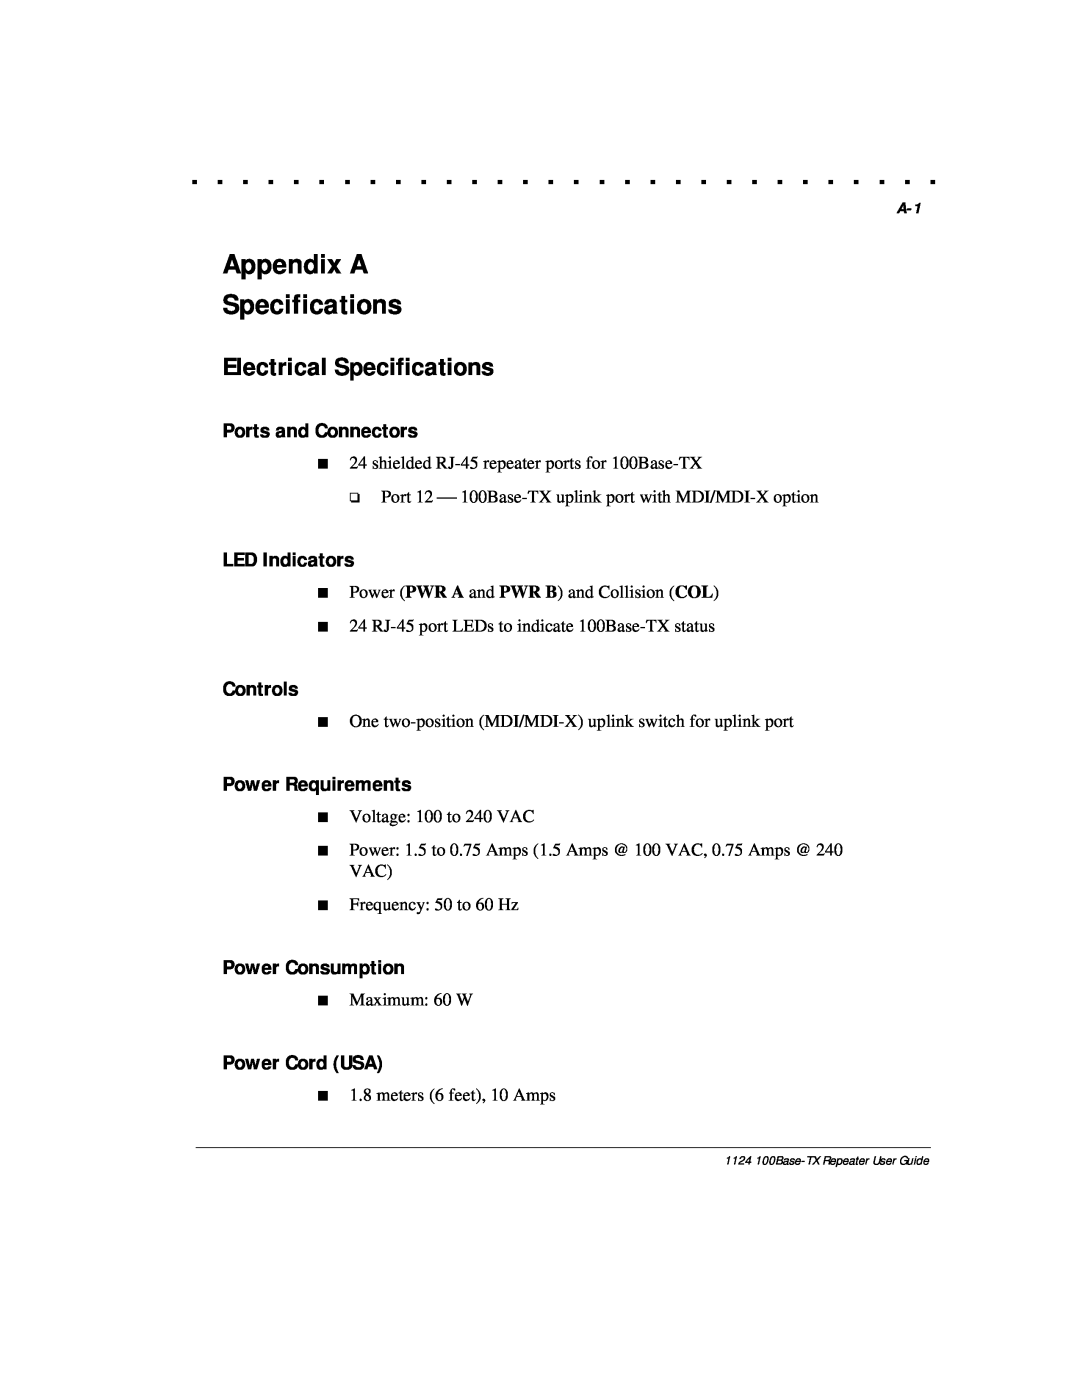 Compaq 1124 manual Appendix A Specifications, Electrical Specifications, Ports and Connectors, Controls, Power Requirements 